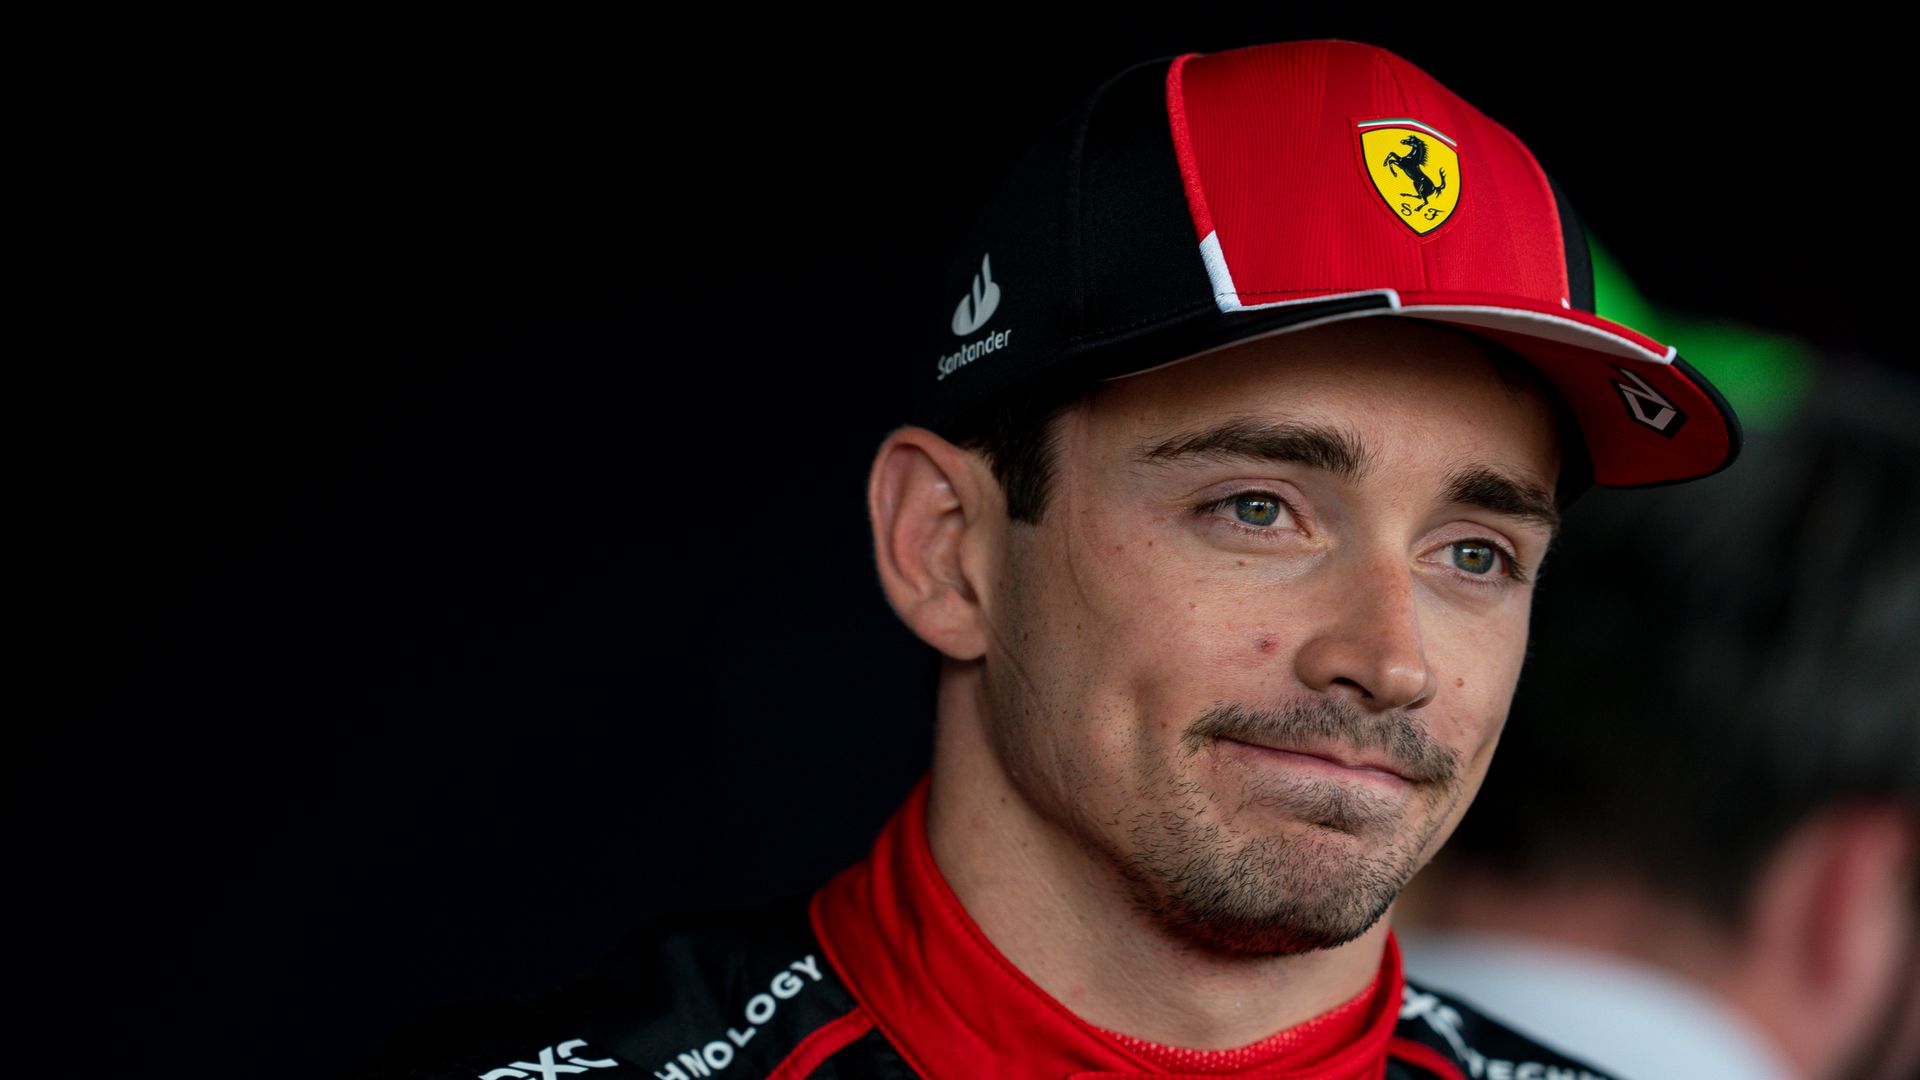 Leclerc: Ferrari's difficulties at Silverstone even worse than expected